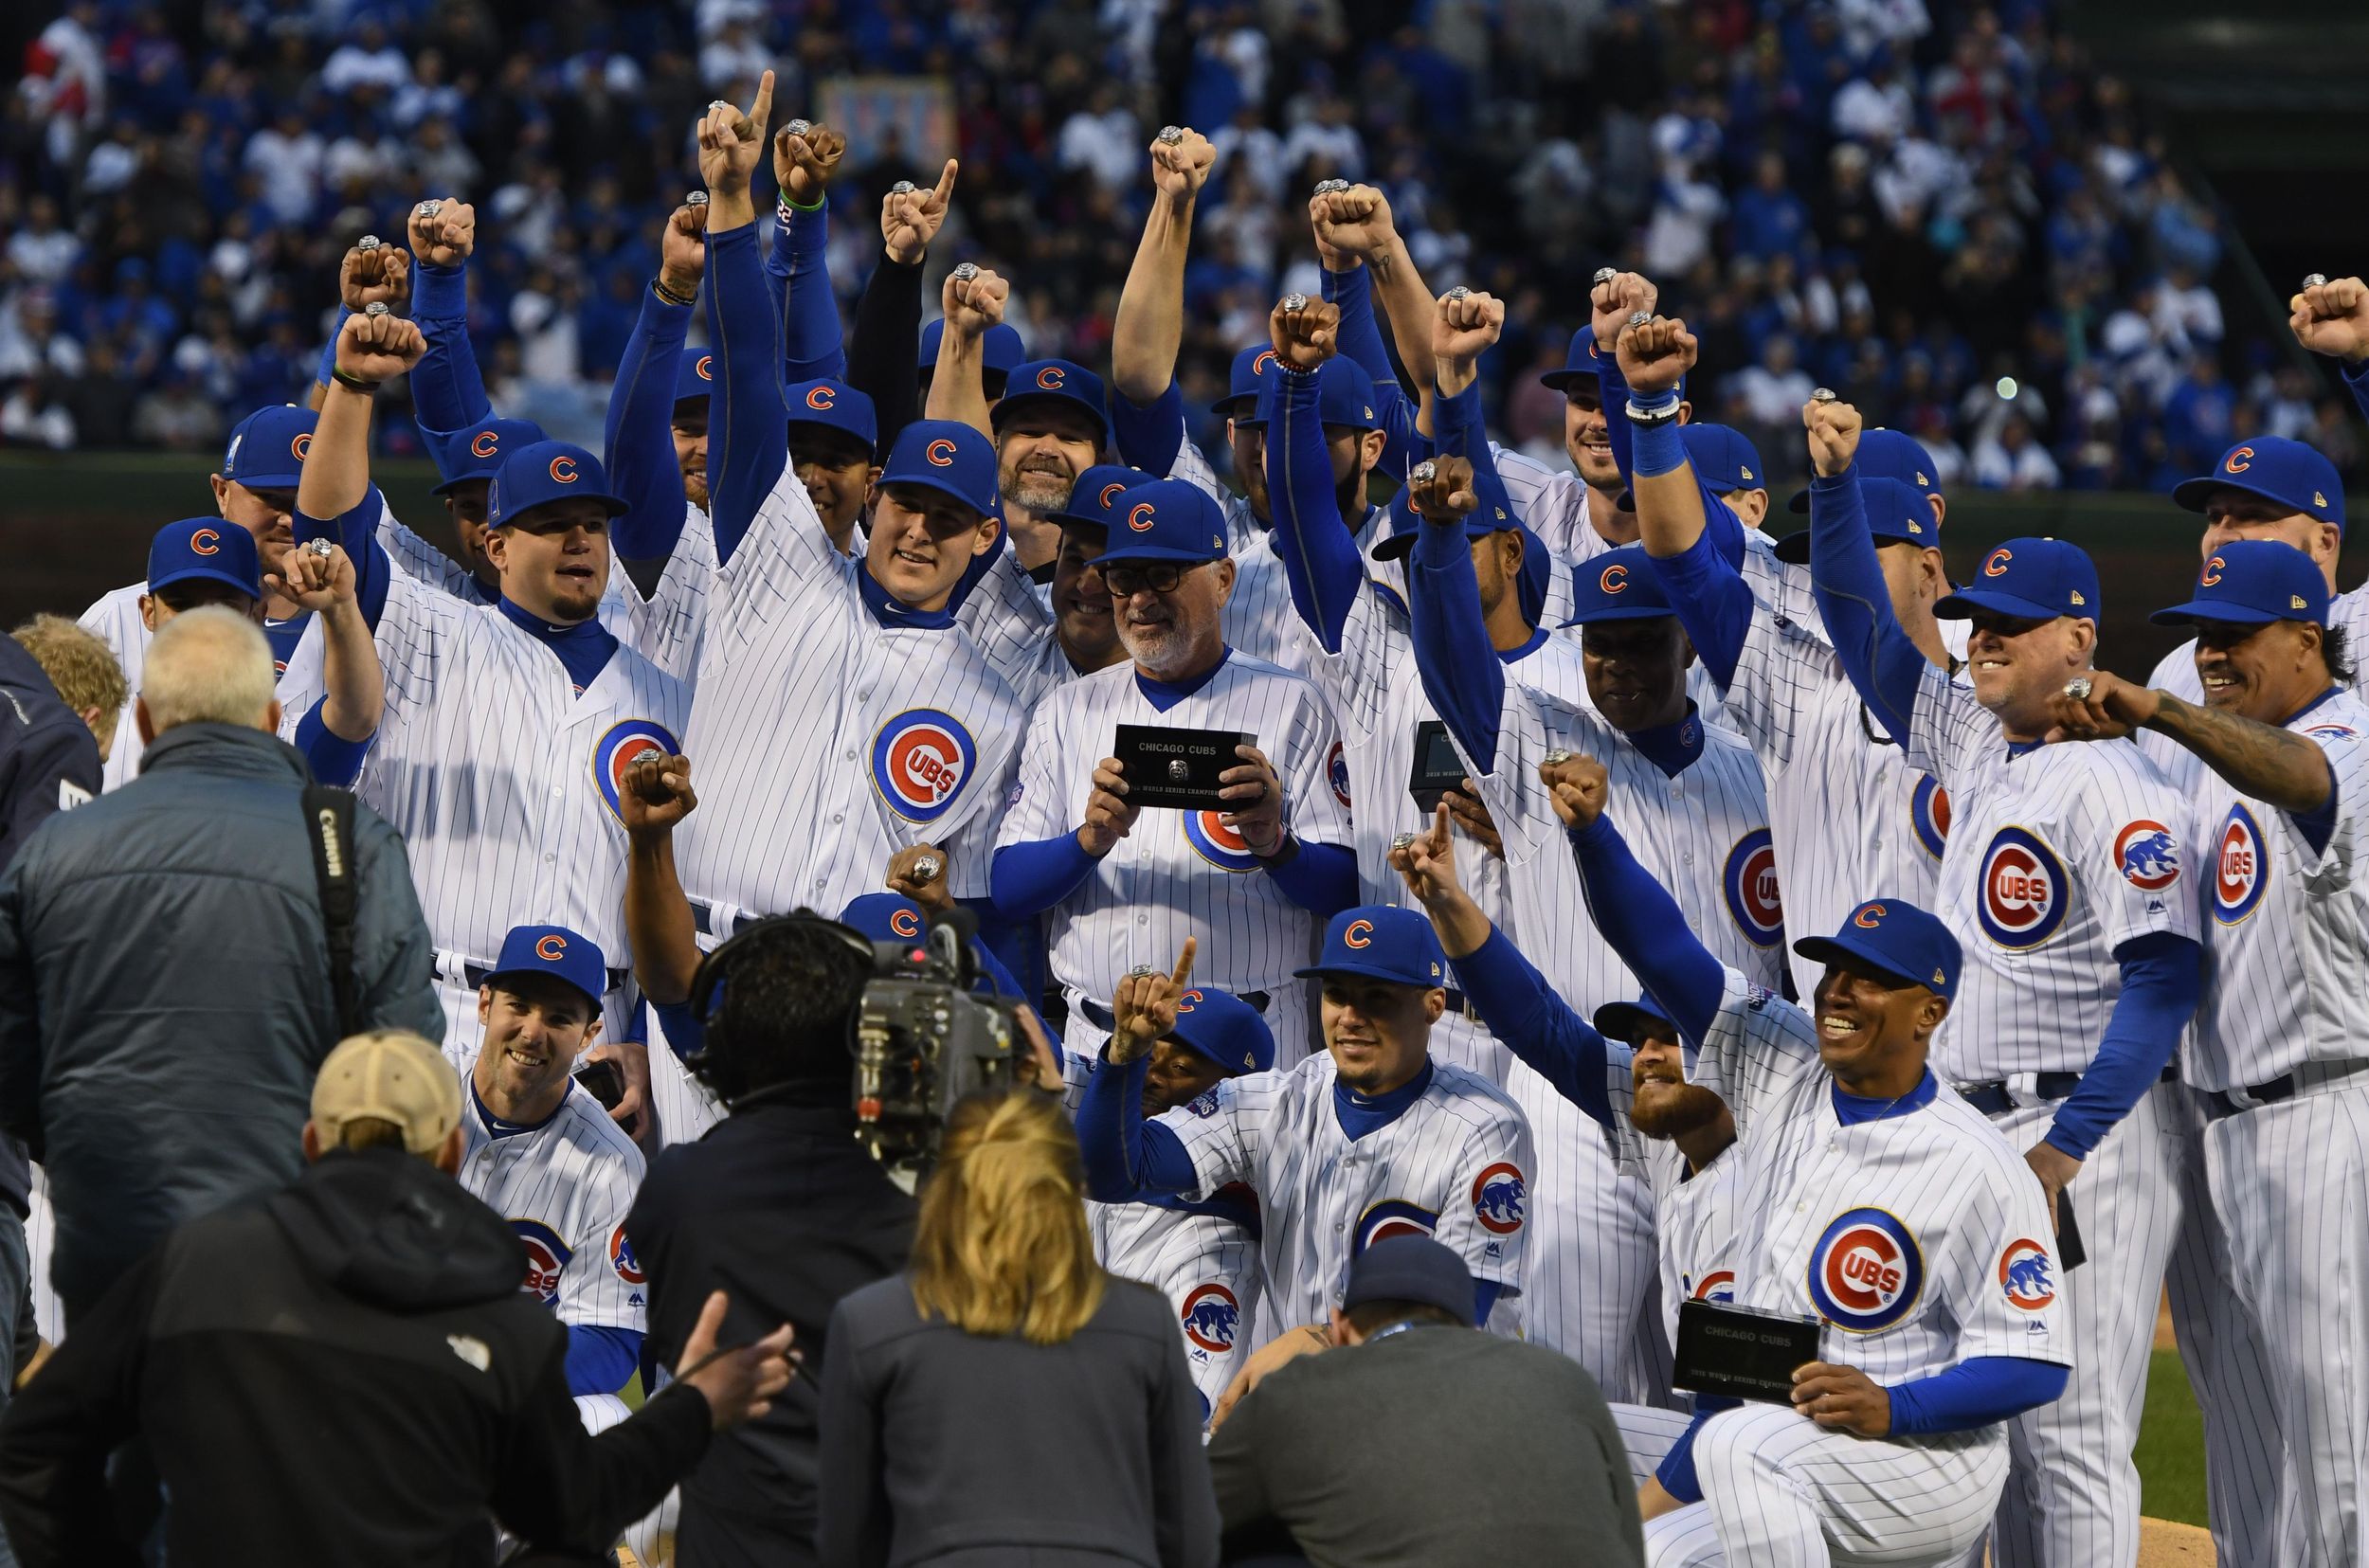 Auction canceled for Chicago Cubs 2016 World Series ring The